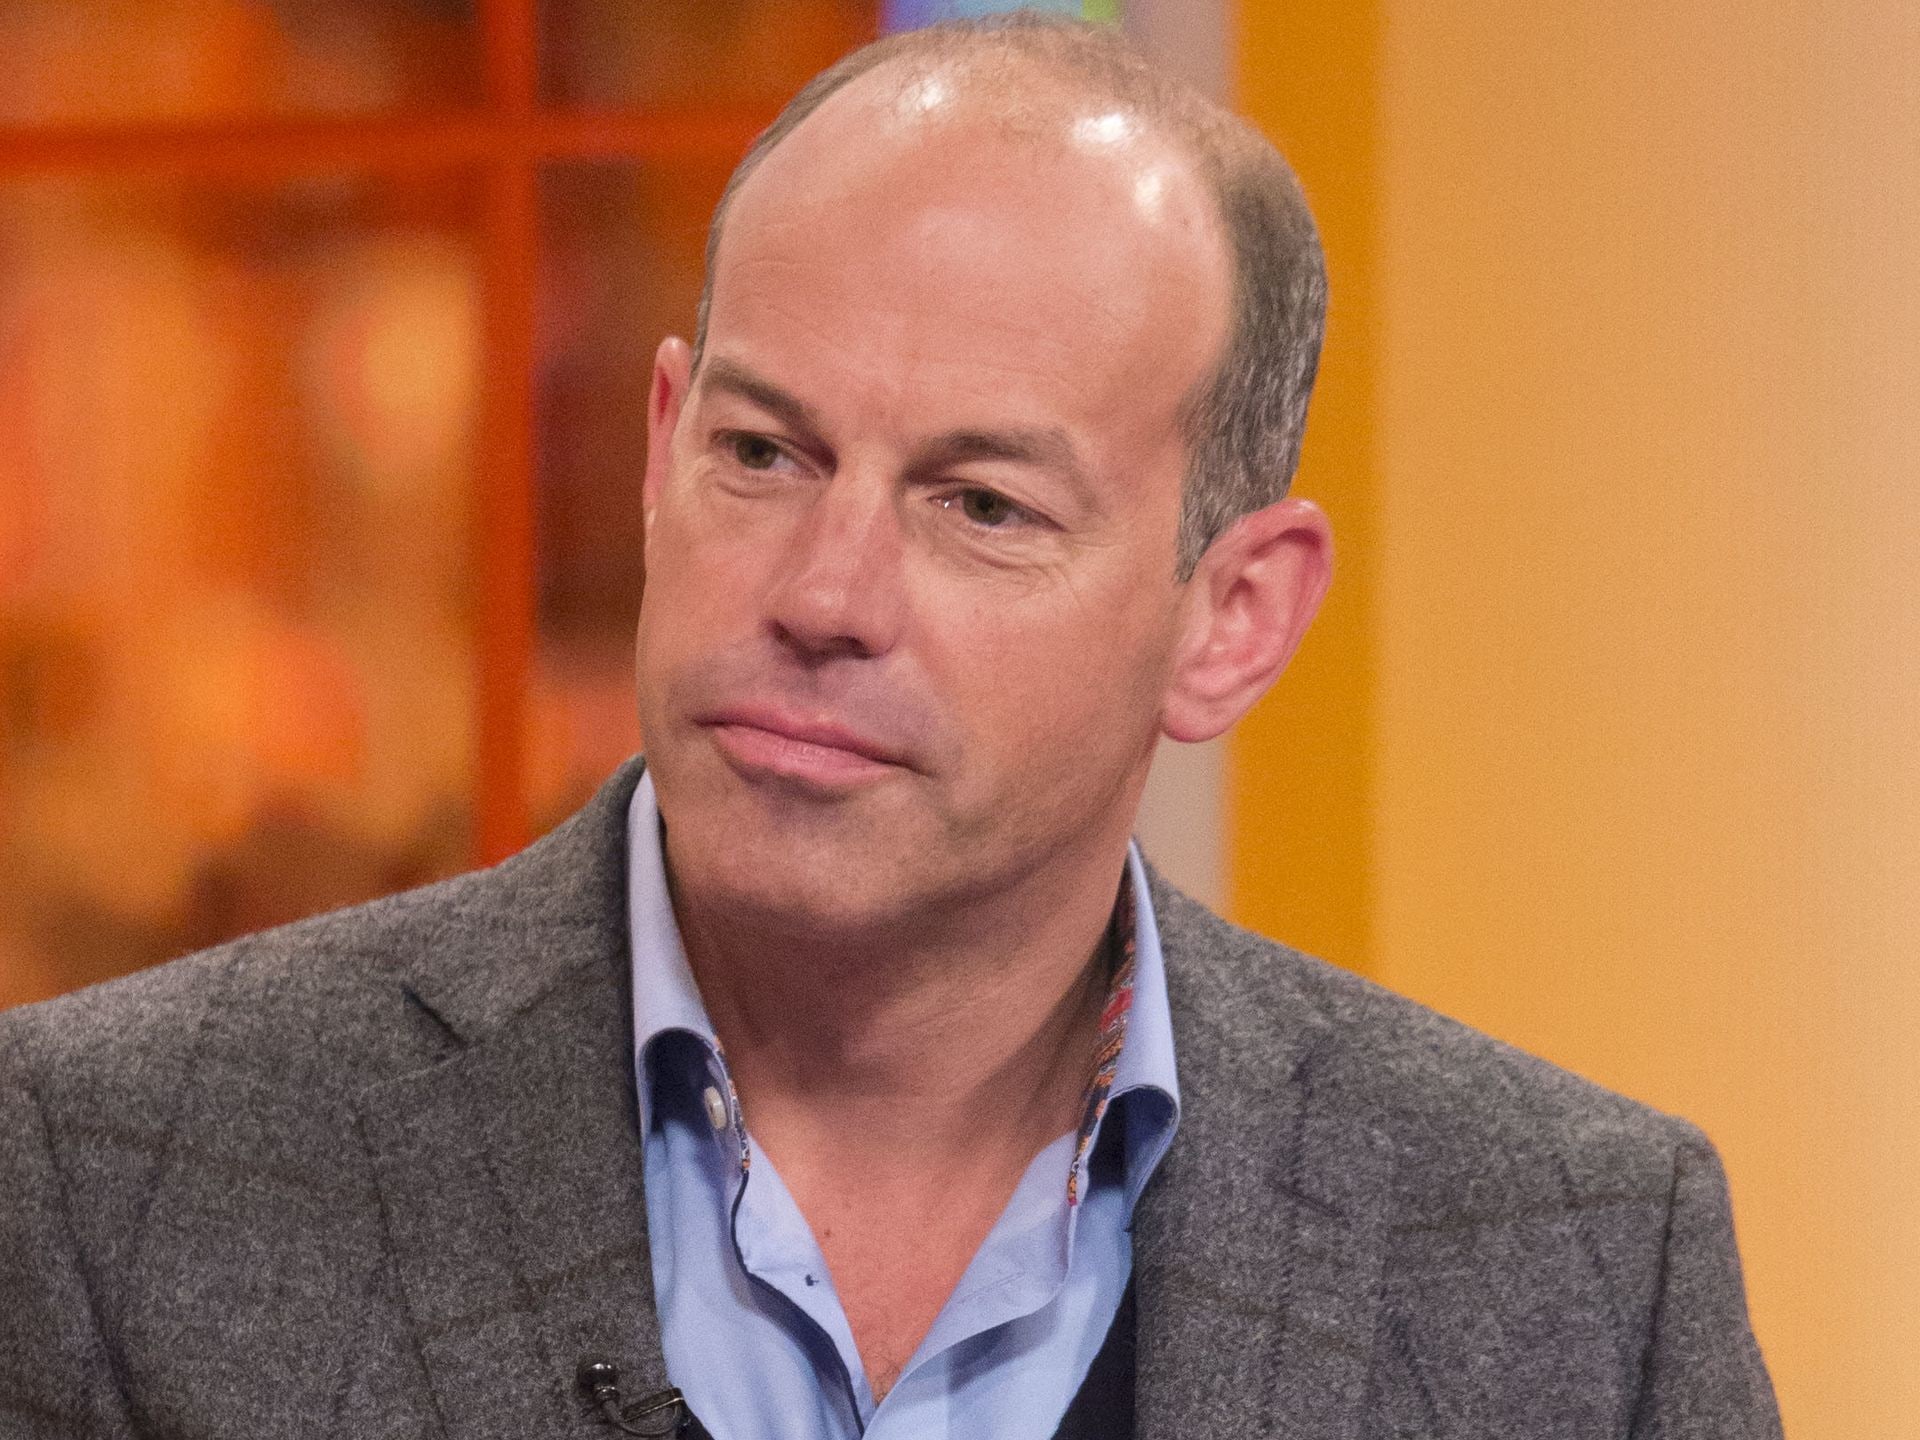 Phil Spencer 2023: Wife, net worth, tattoos, smoking & body facts